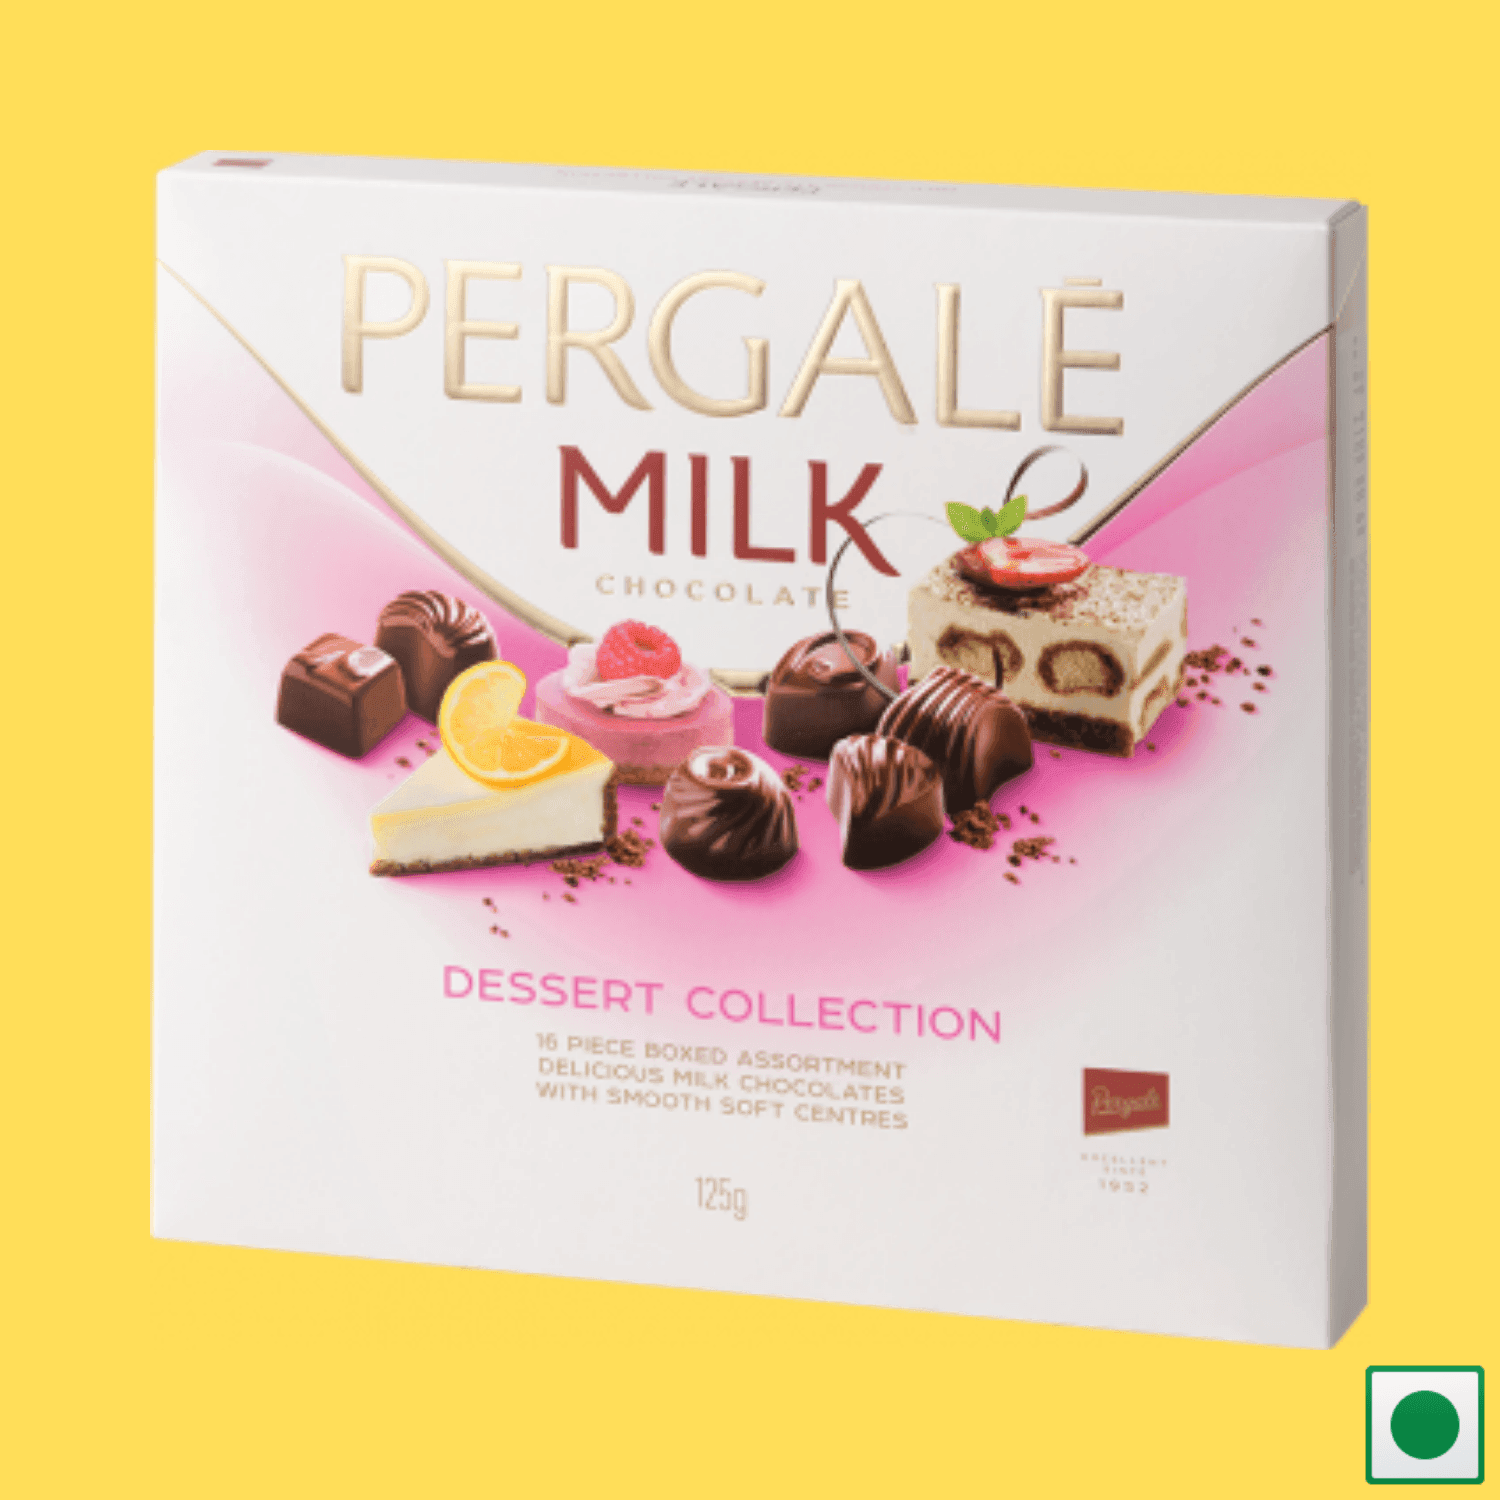 Pergale Desert Collection Chocolate, 125g (Imported) - Super 7 Mart